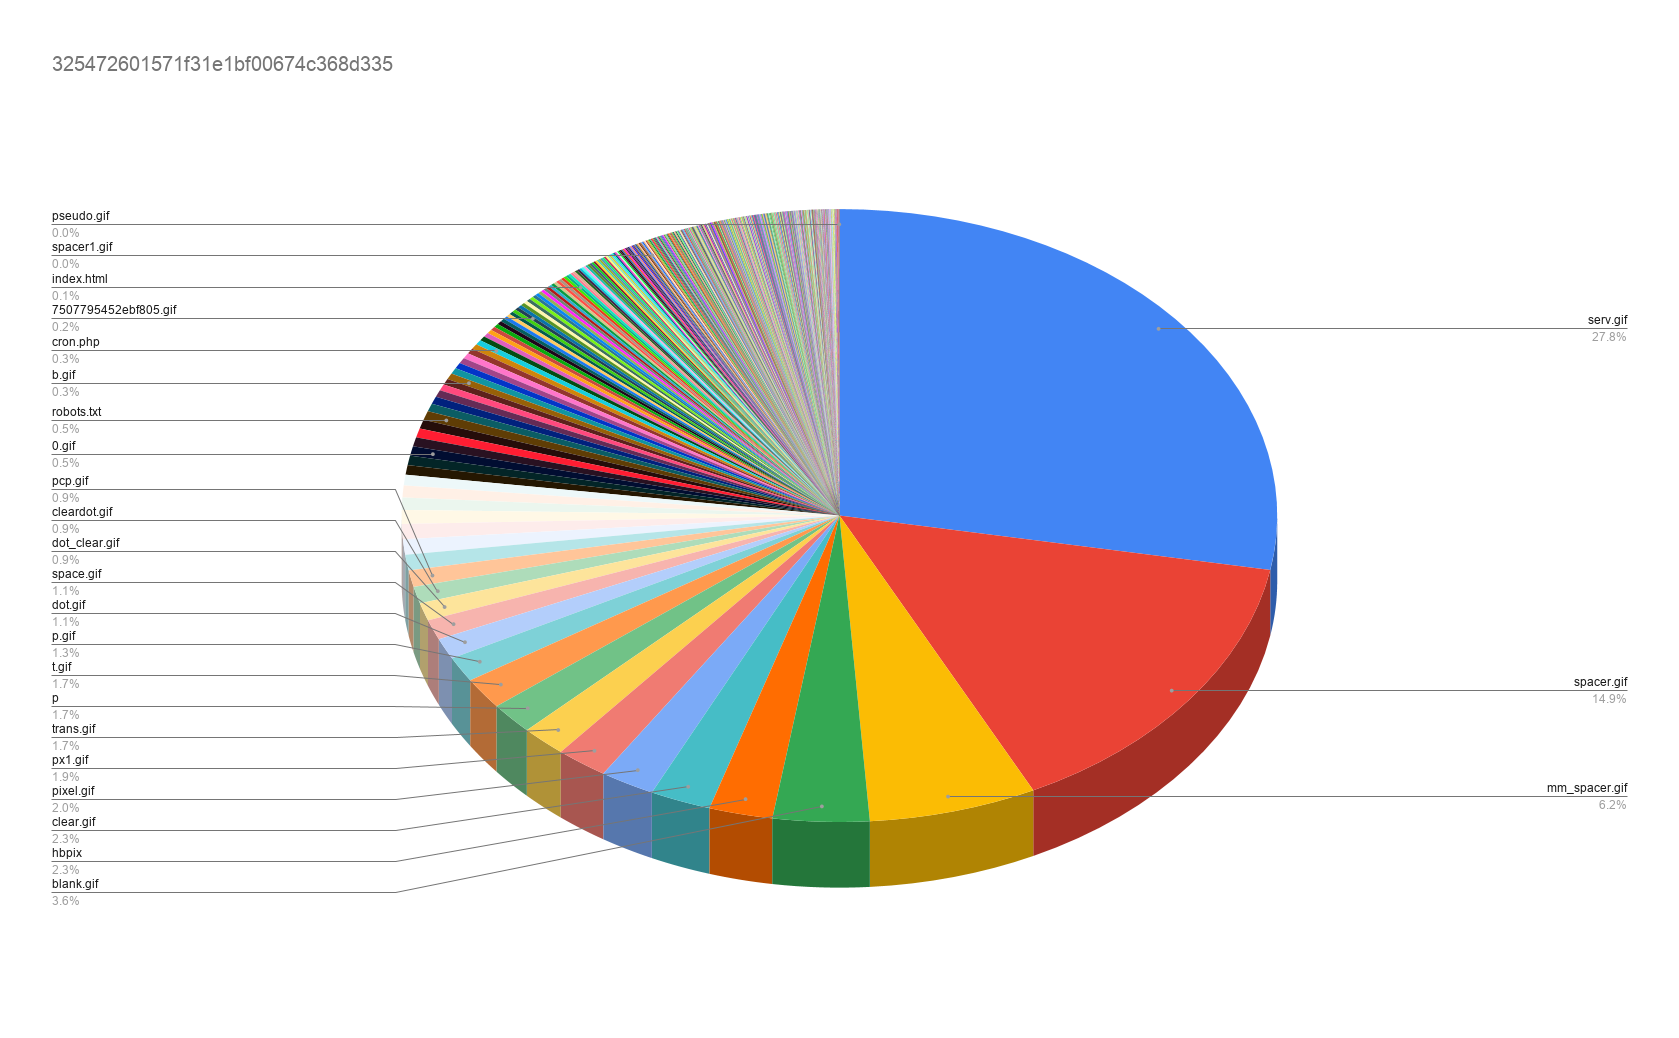 Pie chart of top 500 filenames for 325472601571f31e1bf00674c368d335 with serv removed.